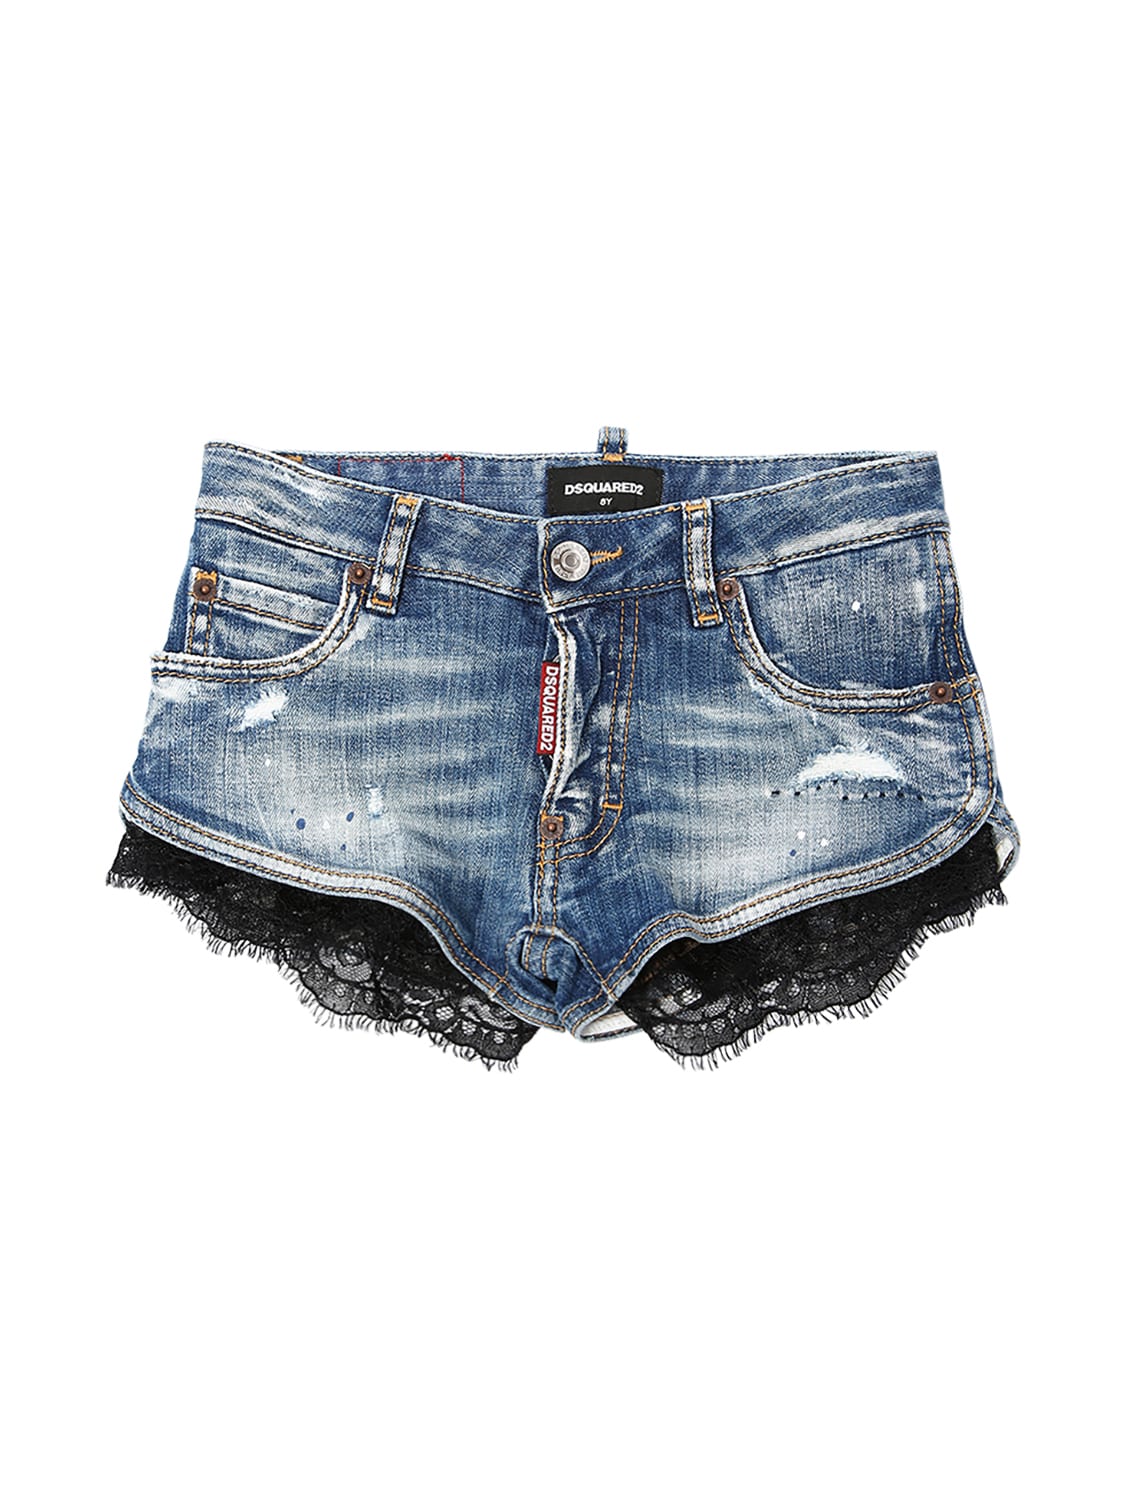 Dsquared2 Kids' Destroyed & Painted Stretch Denim Shorts